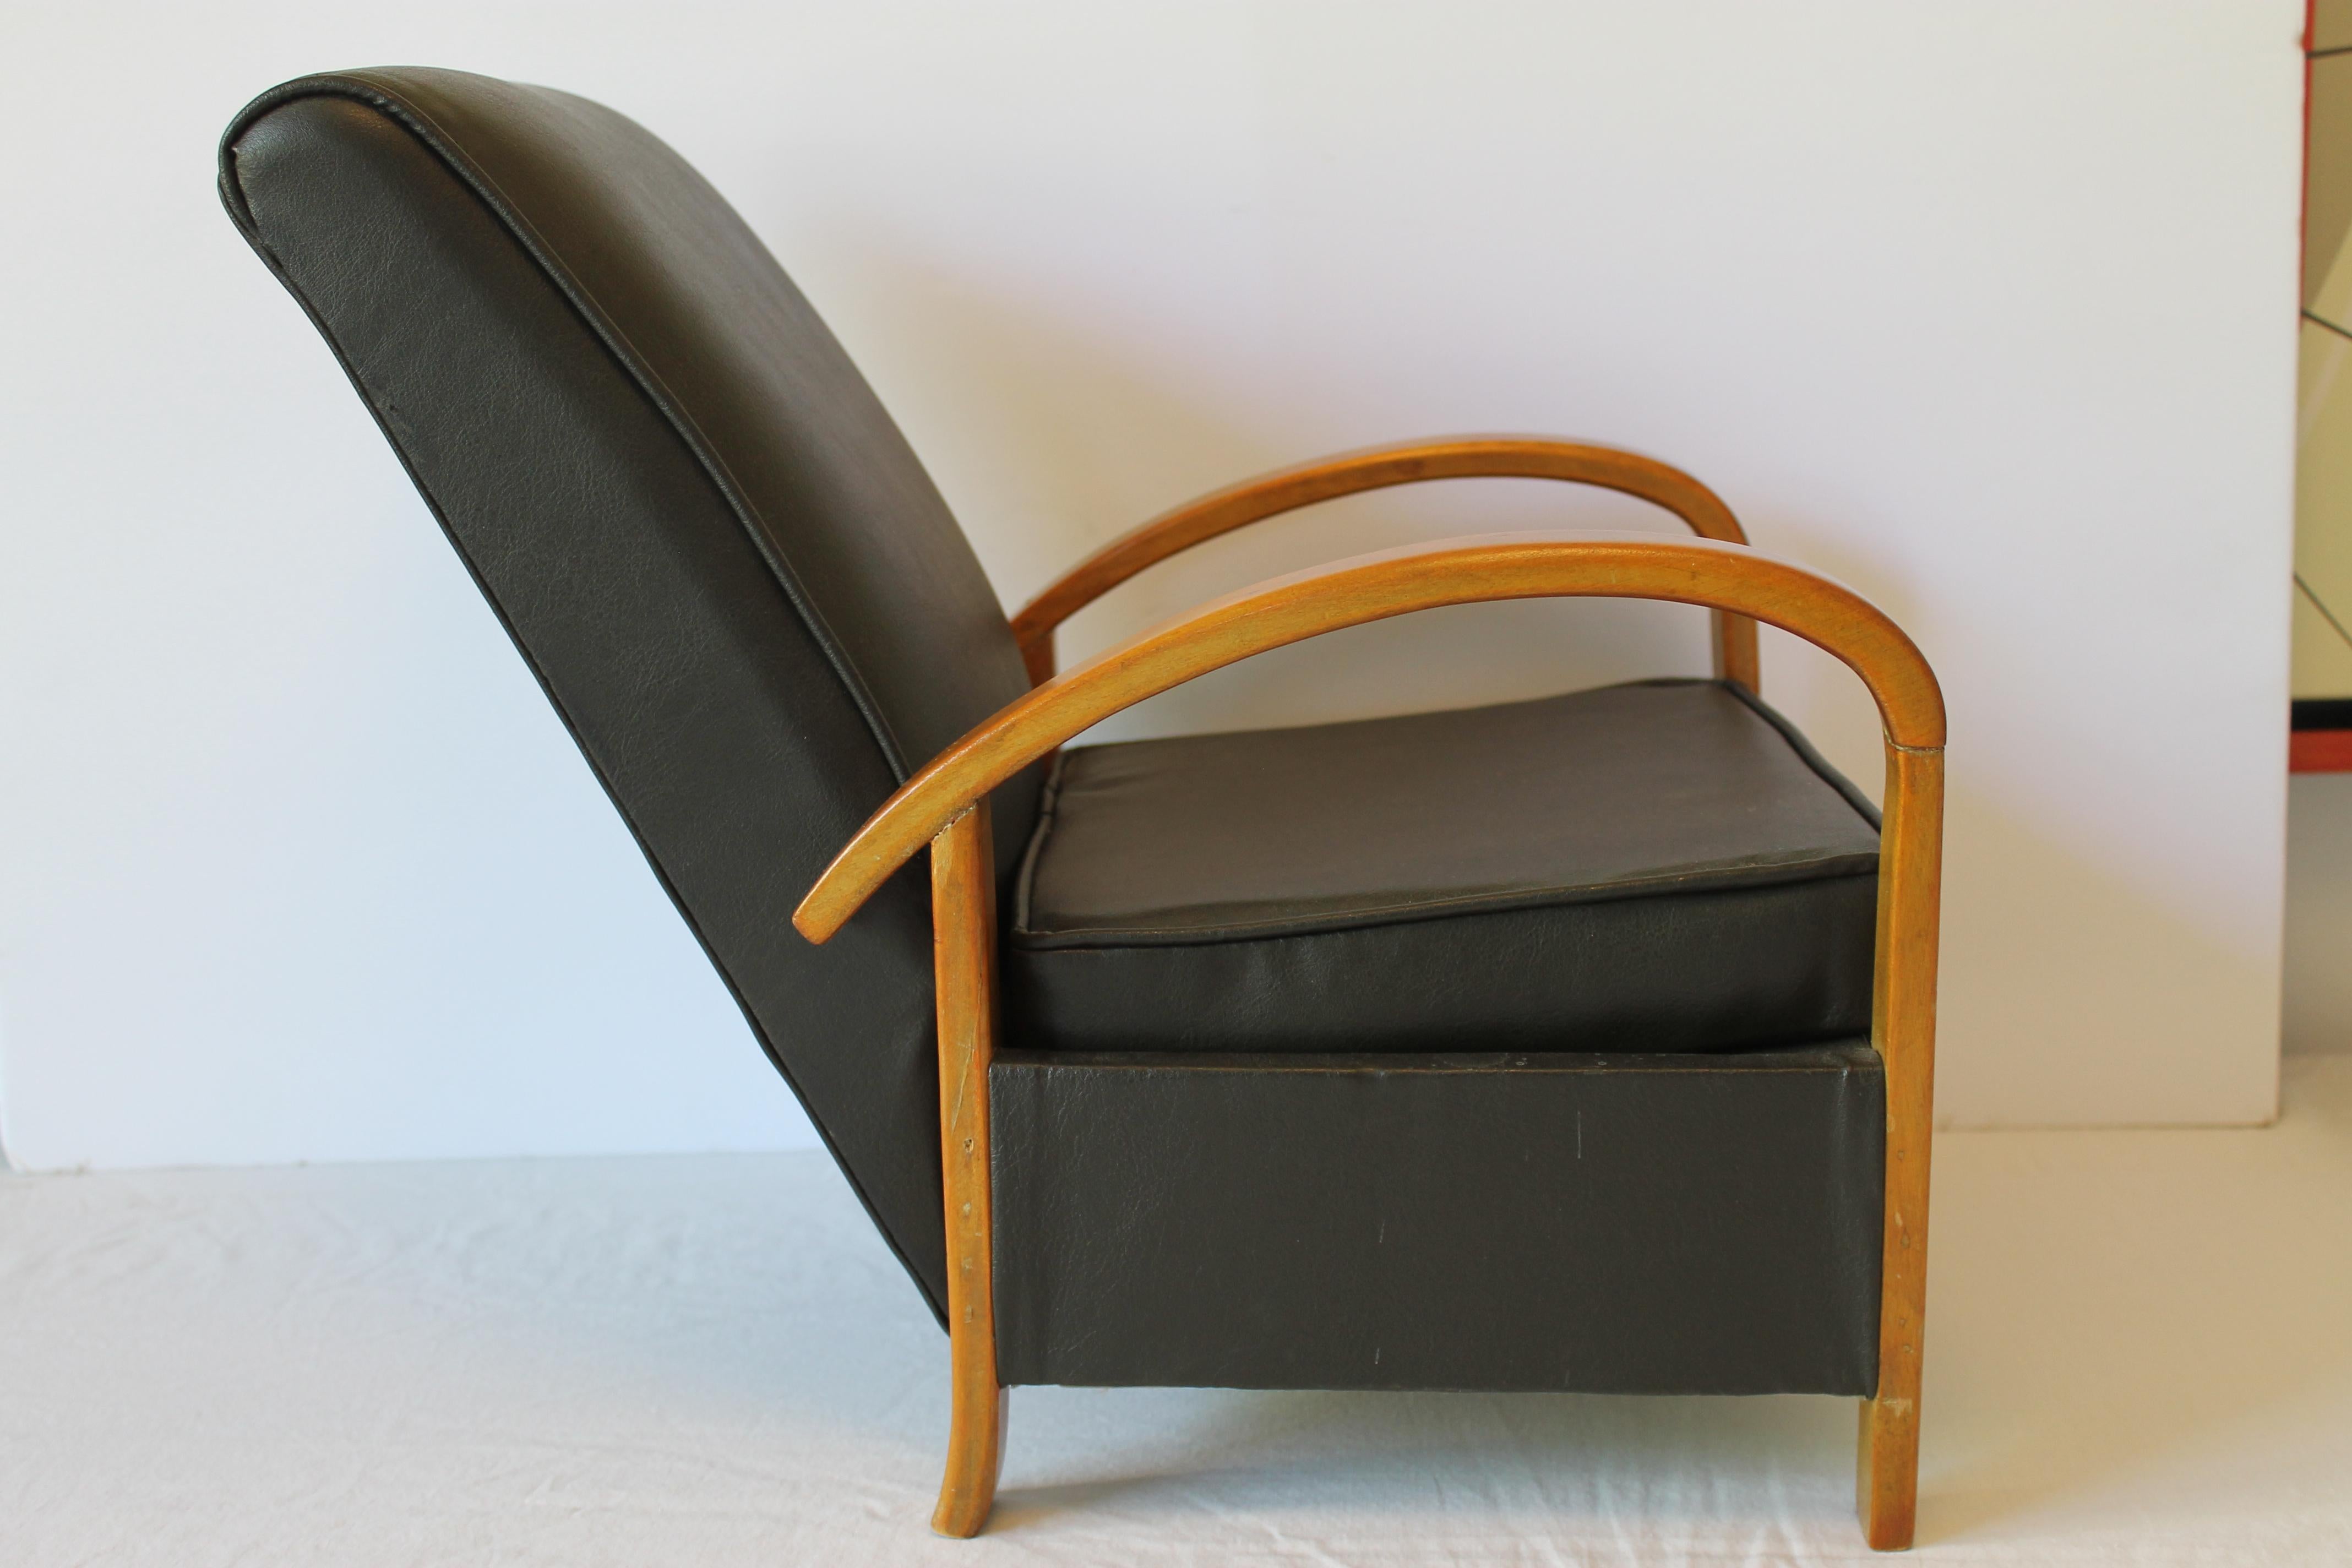 Salesman sample of a 1950s lounge chair. Chair measures 11